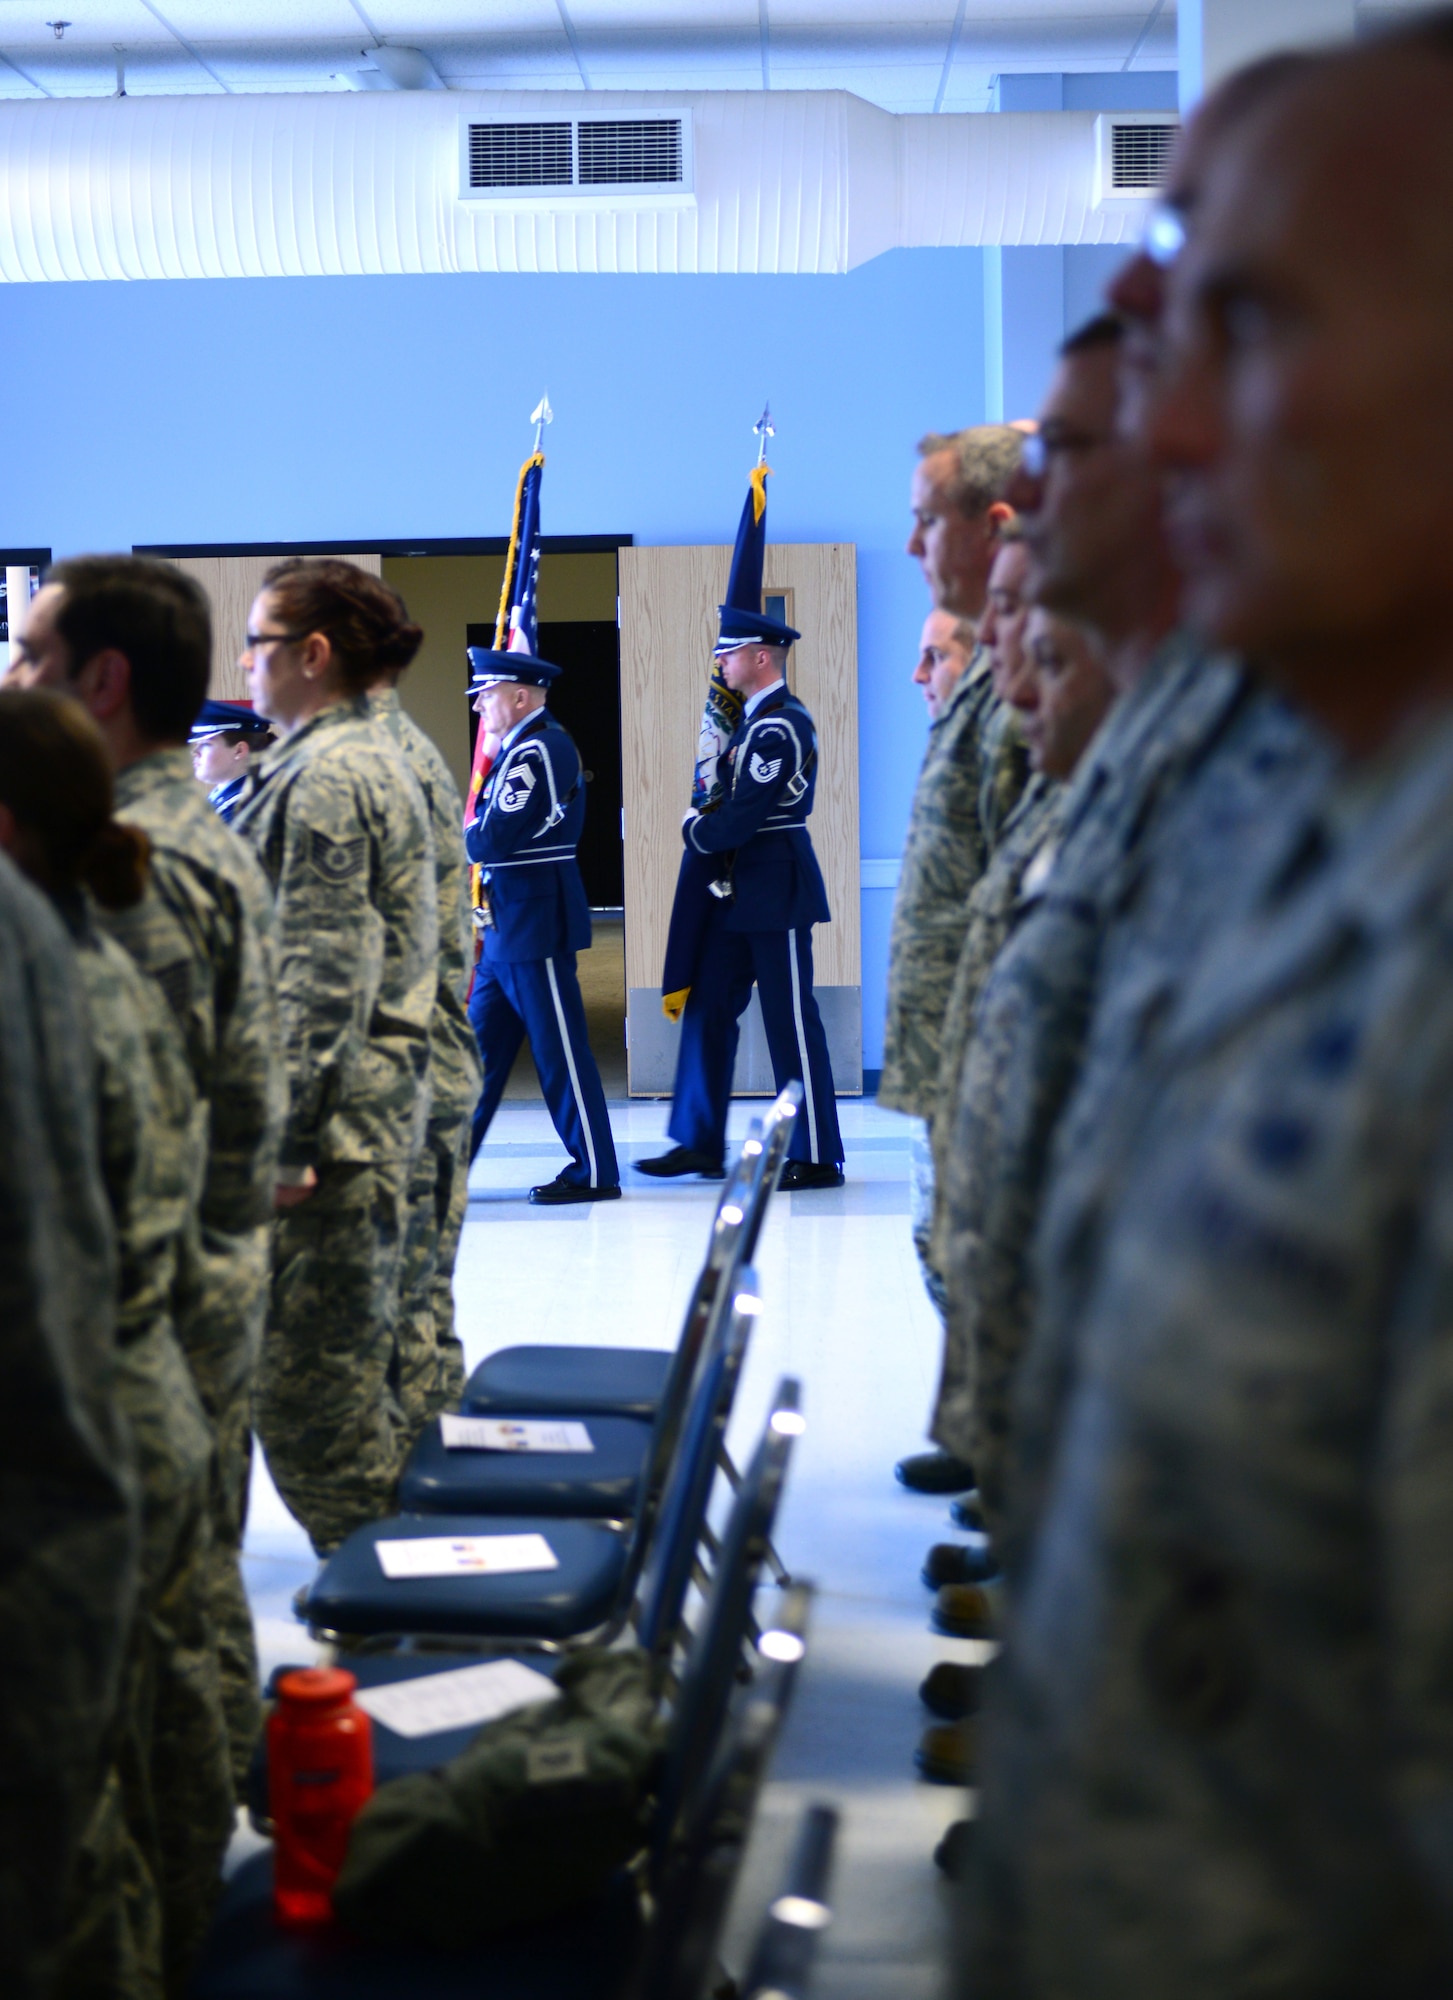 The New Hampshire Air National Guard Honor Guard marches past airmen assigned to the 157th Air Refueling Wing during a ceremony April 12, 2015 at Pease Air National Guard Base. The airmen were recognized during a combined Community College of the Air Force and Professional Military Education graduation ceremony. (N.H. Air National Guard photo by Airman Ashlyn J. Correia/RELEASED) 